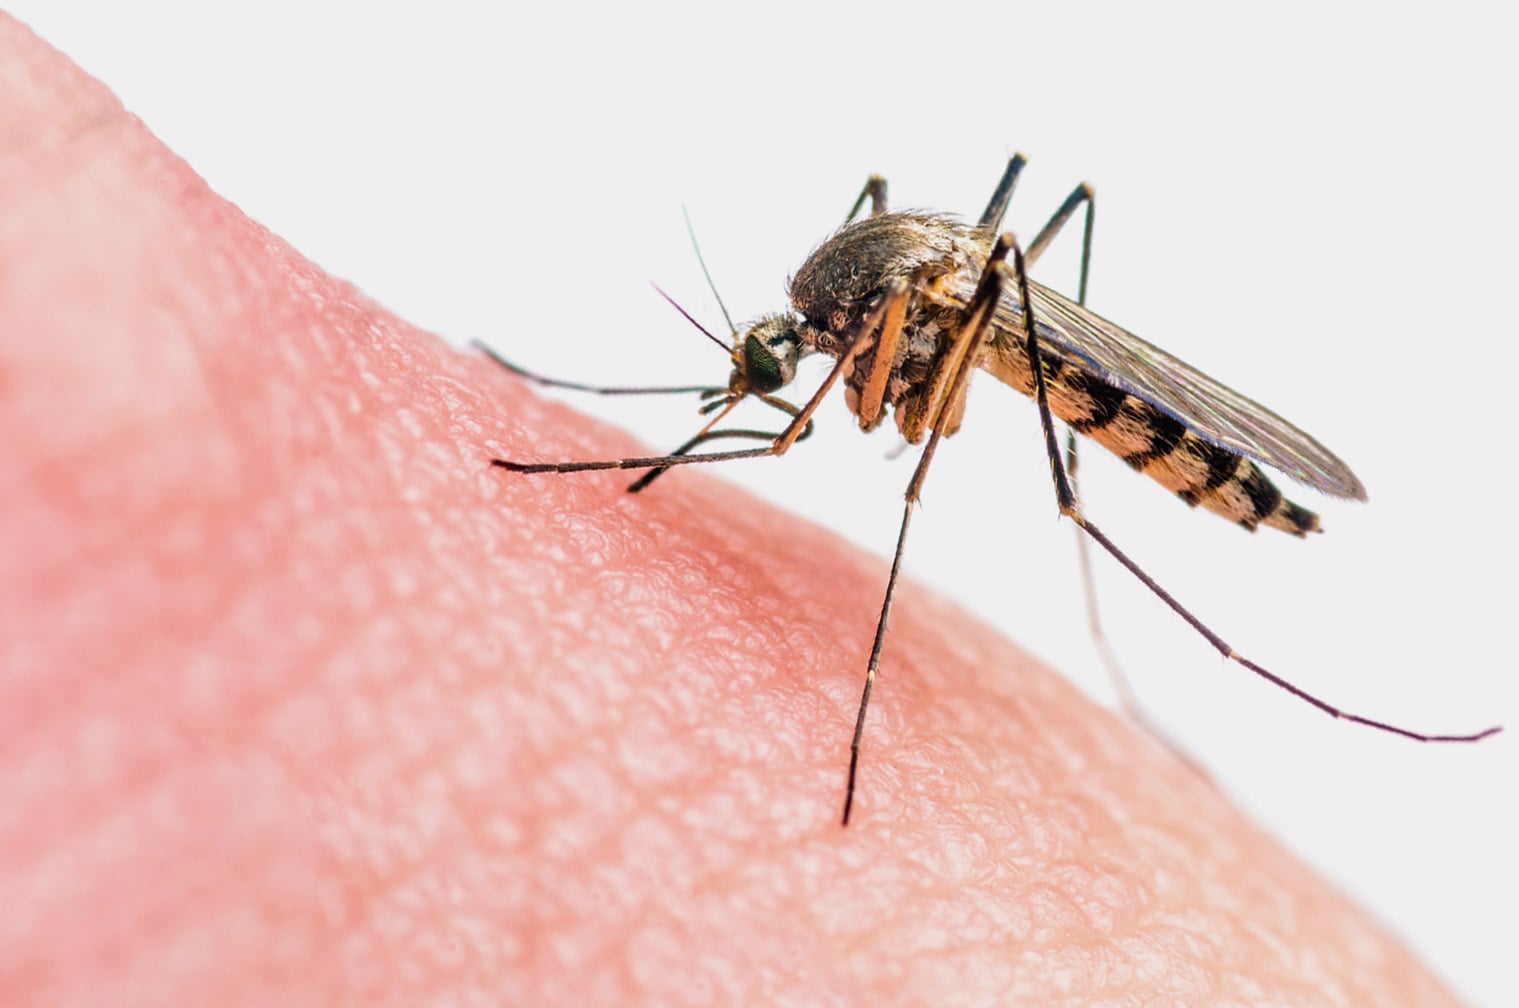 Why Do Mosquitoes Bite in the First Place?